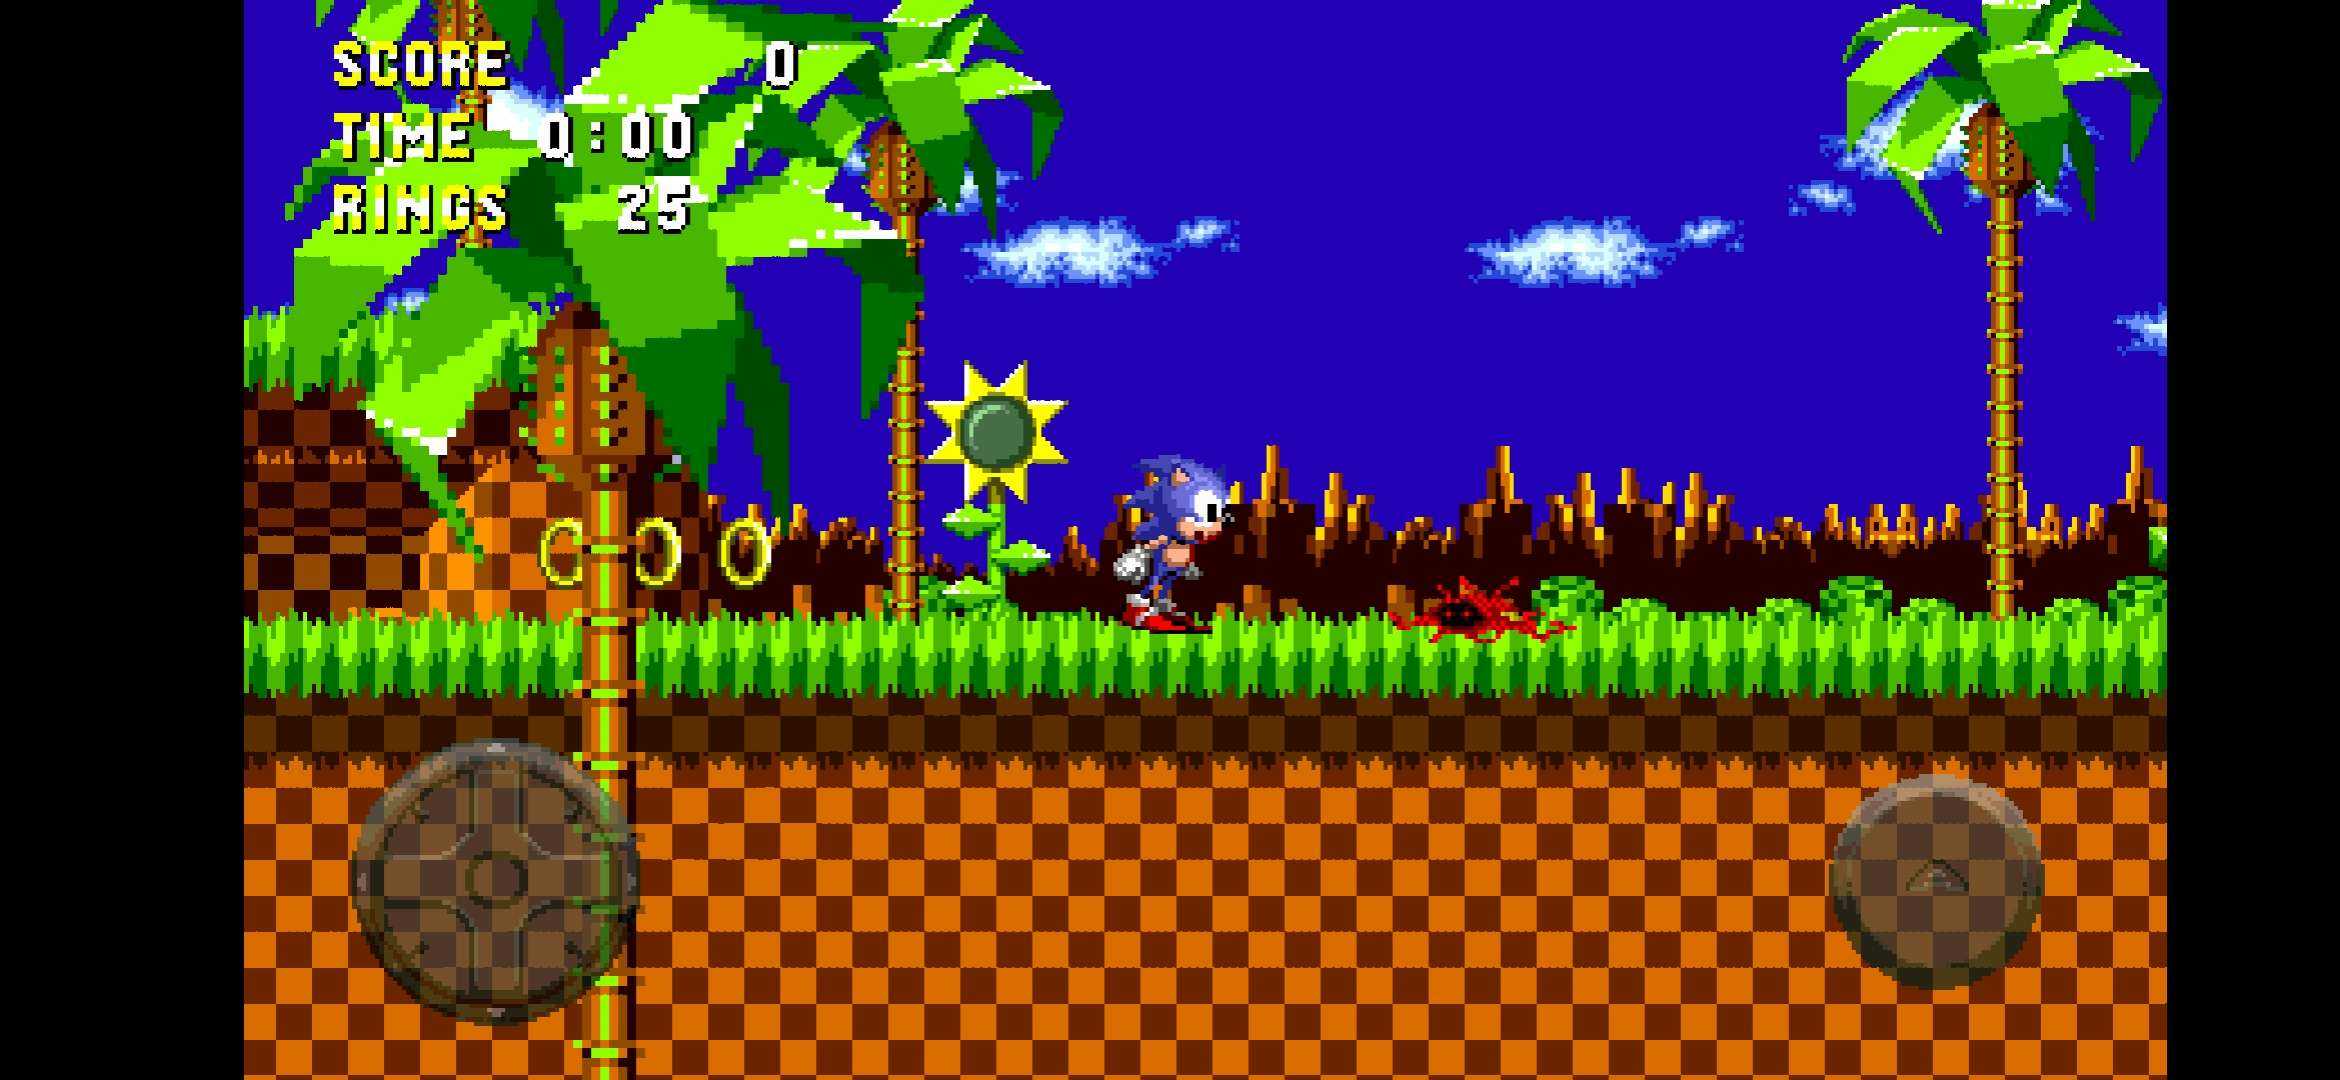 Another Sonic.exe Fan Game 2.0v2.0.0 °